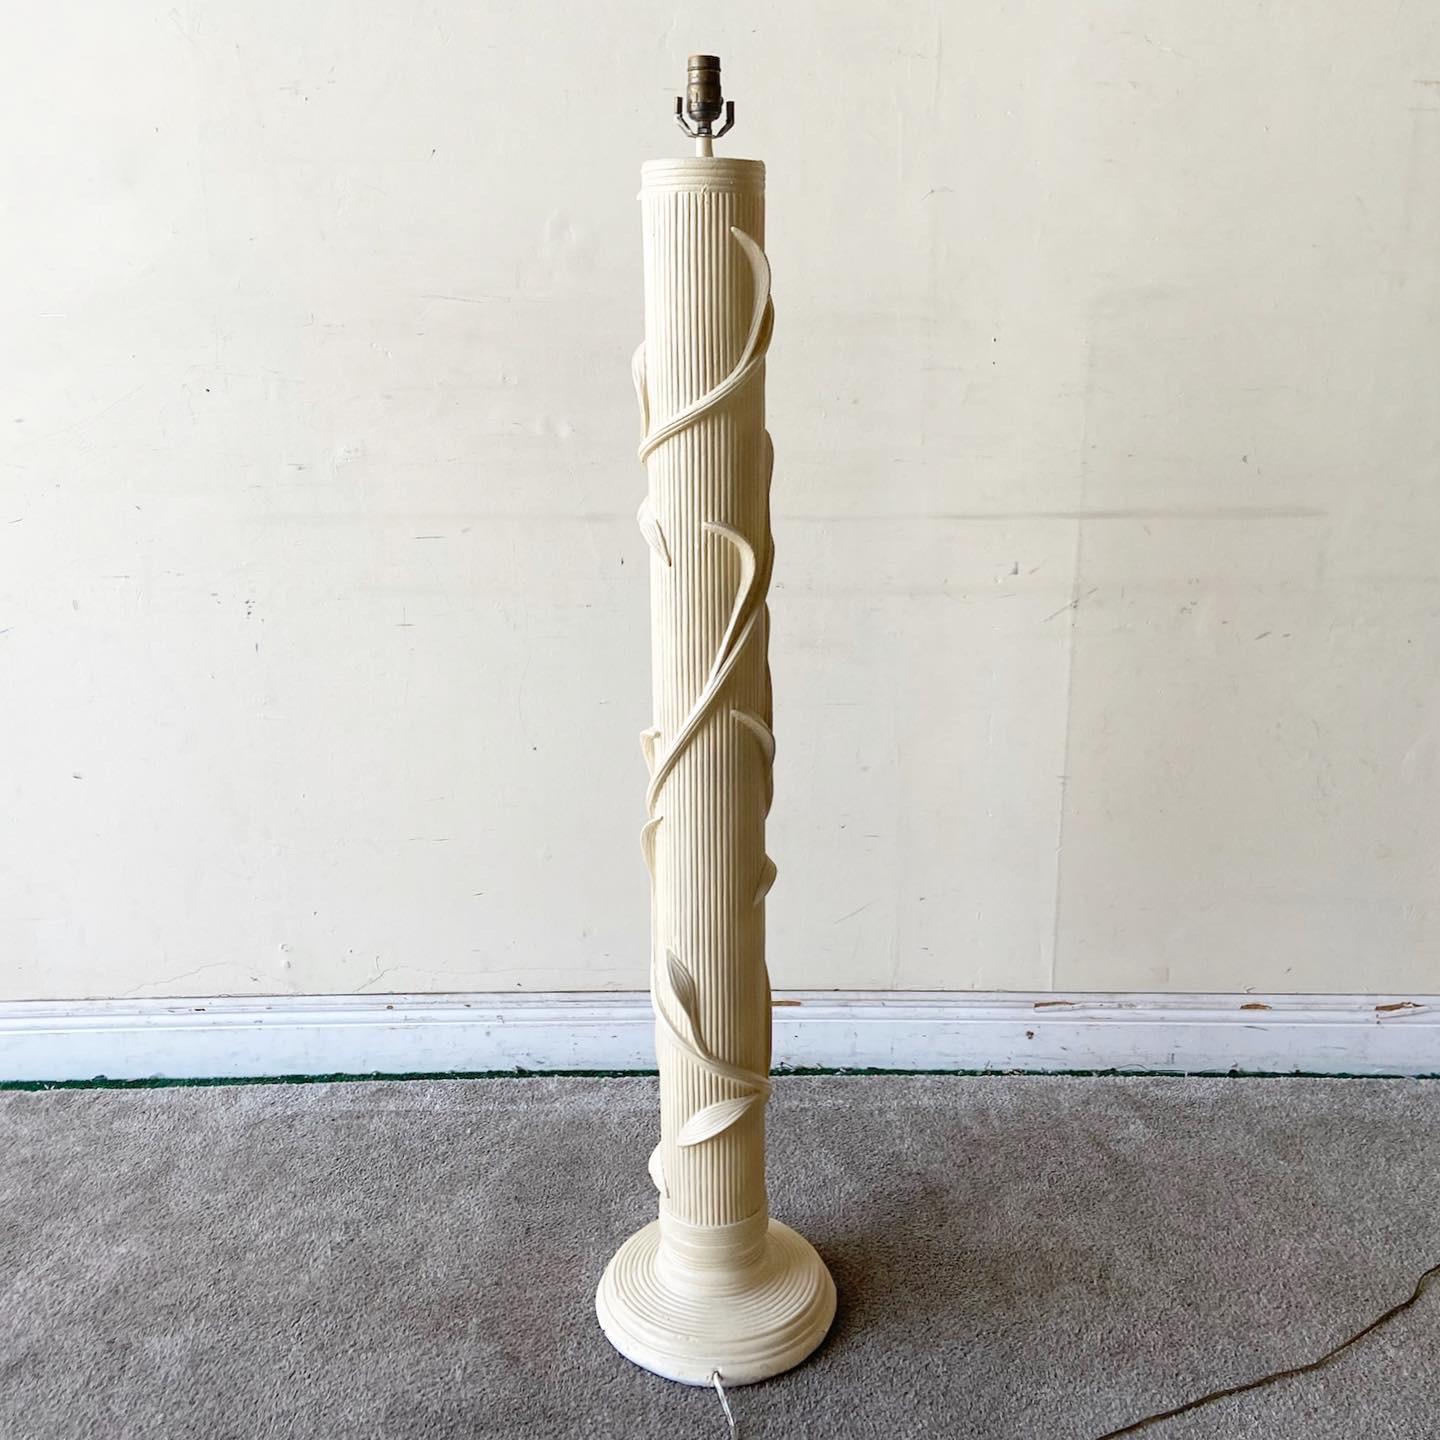 Incredible bohemian ceramic floor lamp. Features a faux pencil reed etched throughout the lamp body.

3 way lighting.